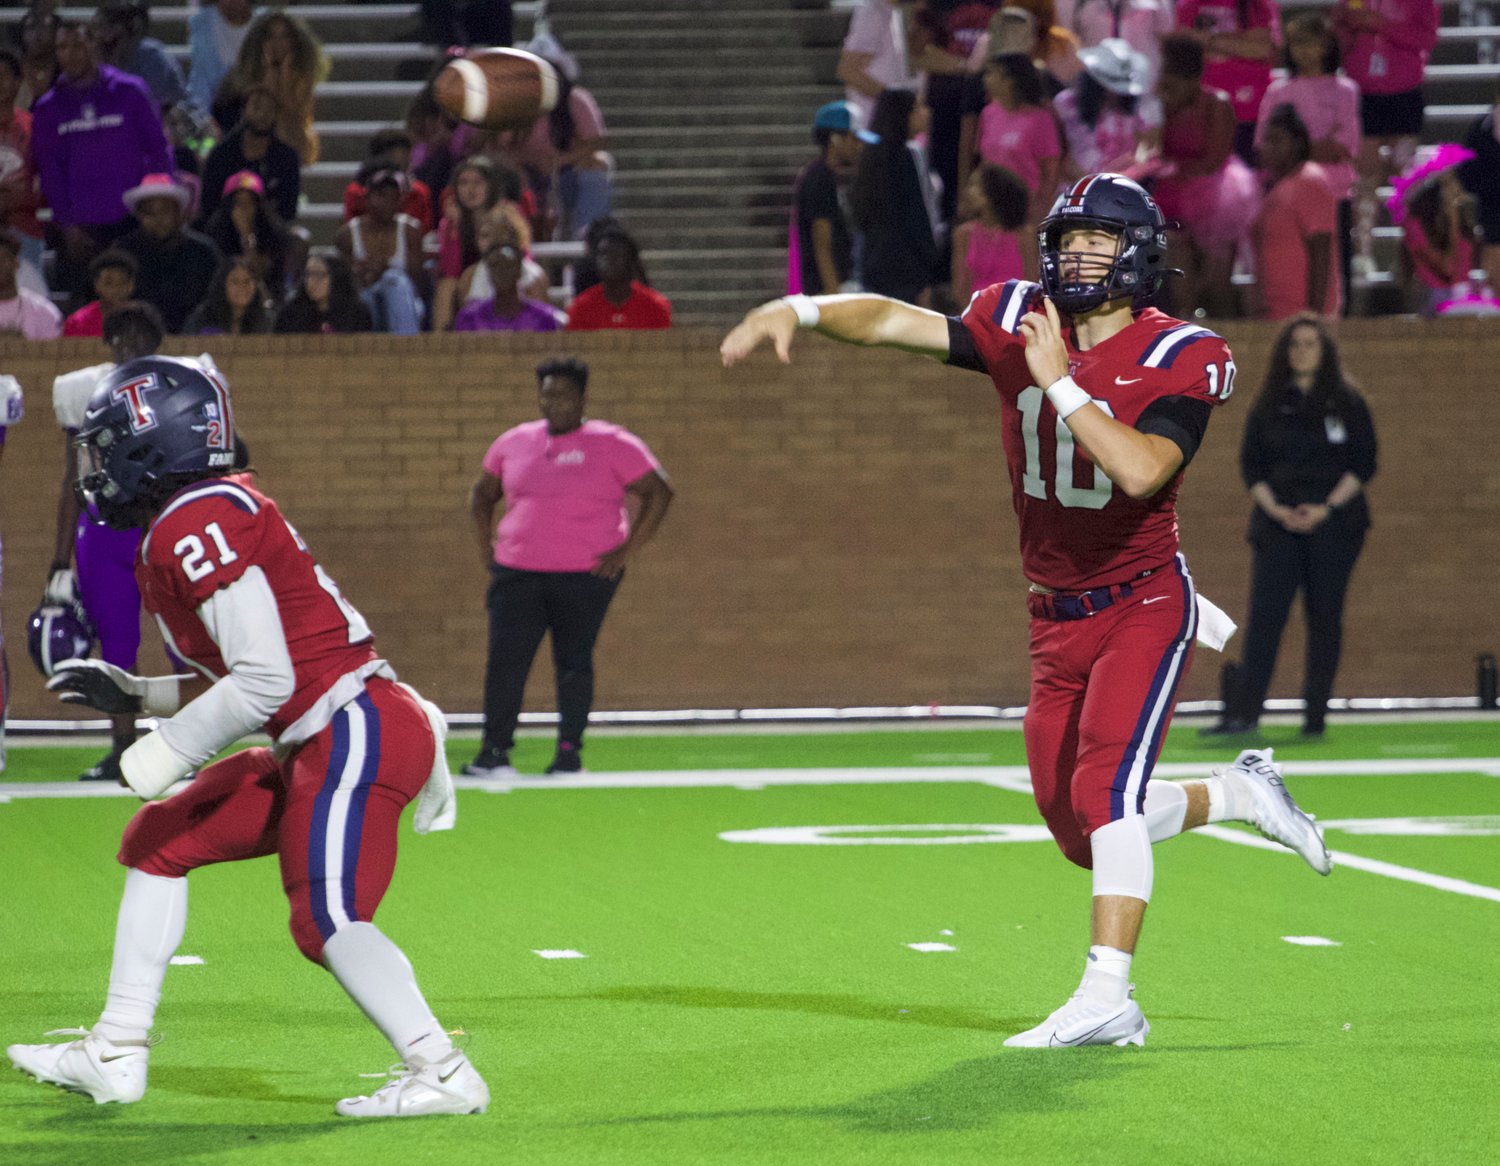 Wyatt Young passes a ball during Thursday's game between Tompkins and Morton Ranch at Rhodes Stadium.